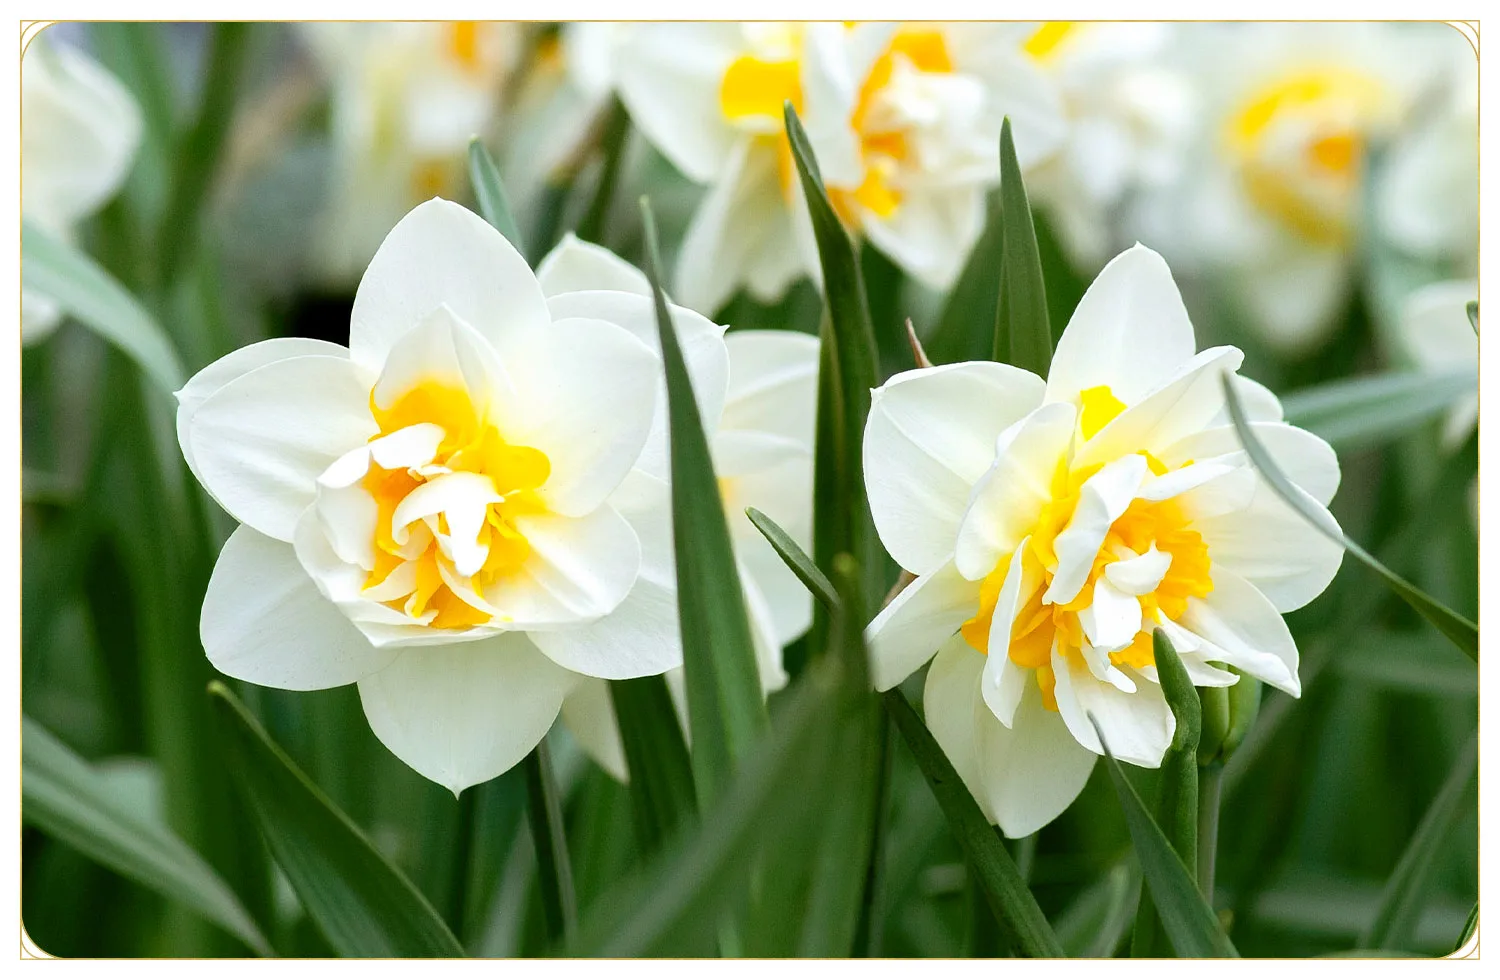 Daffodil Care Guide: How to Care for Daffodils + Growing Tips